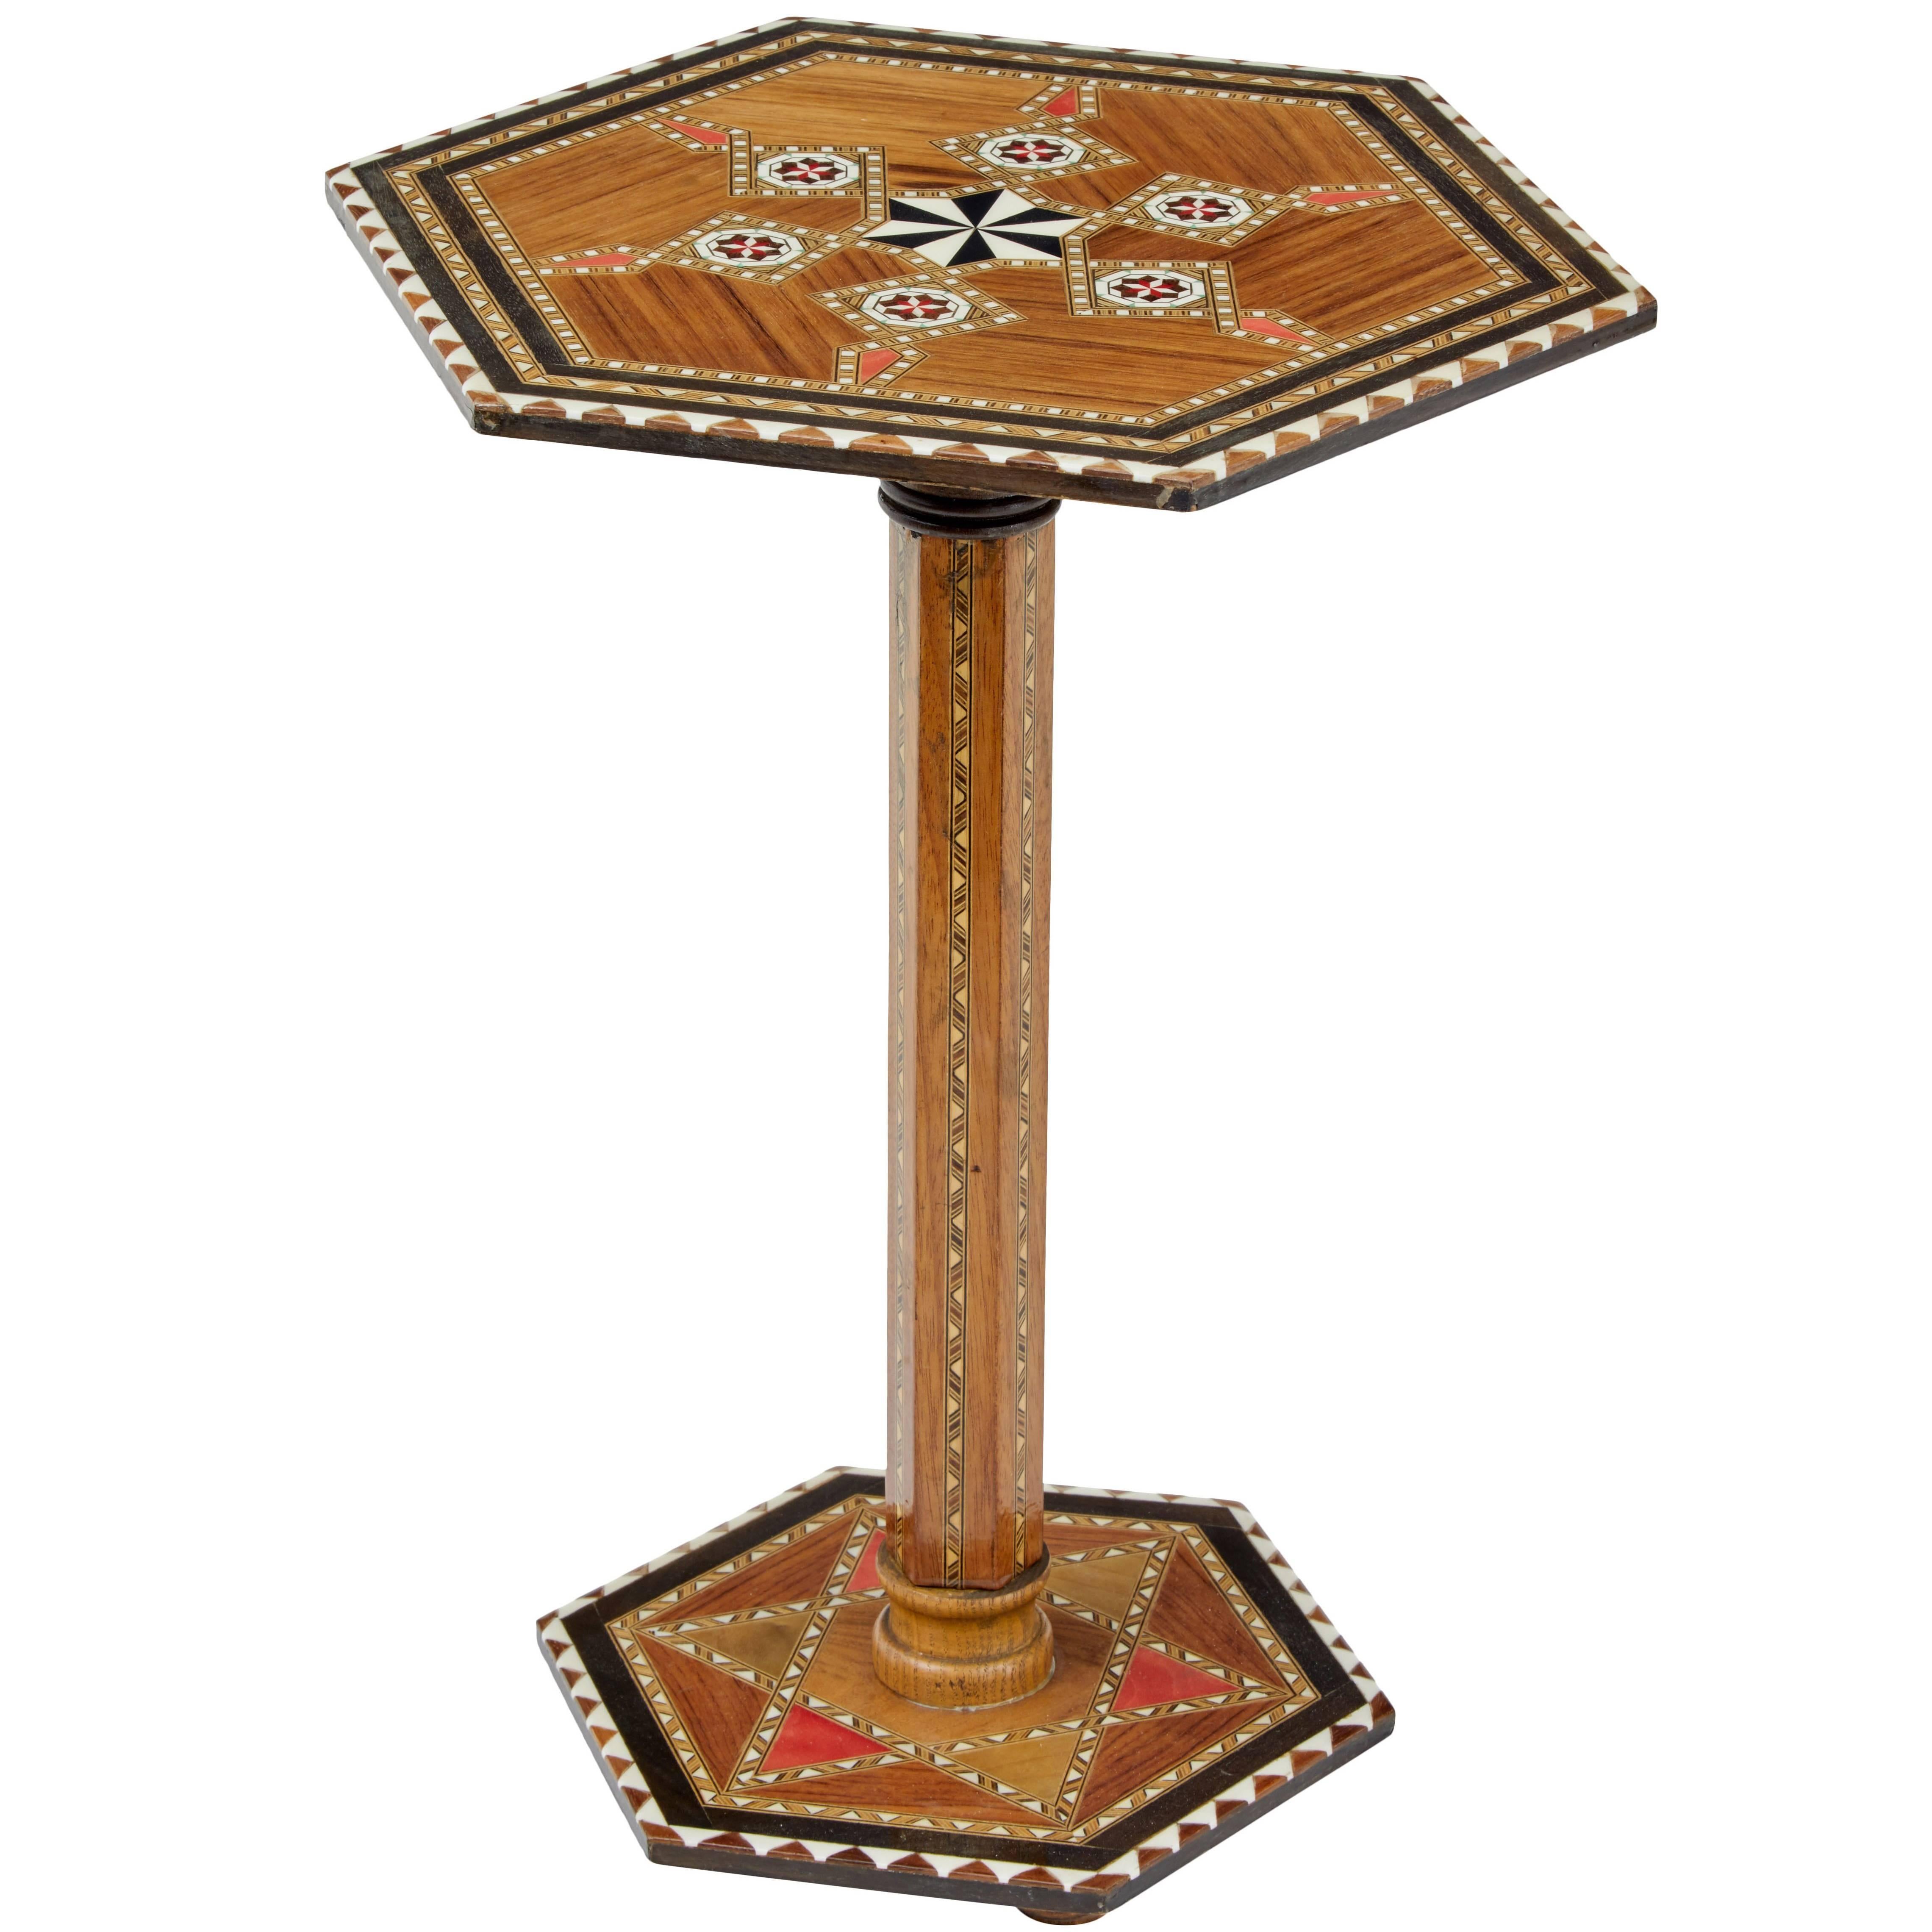 20th Century Small Damascan Inlaid Games Table